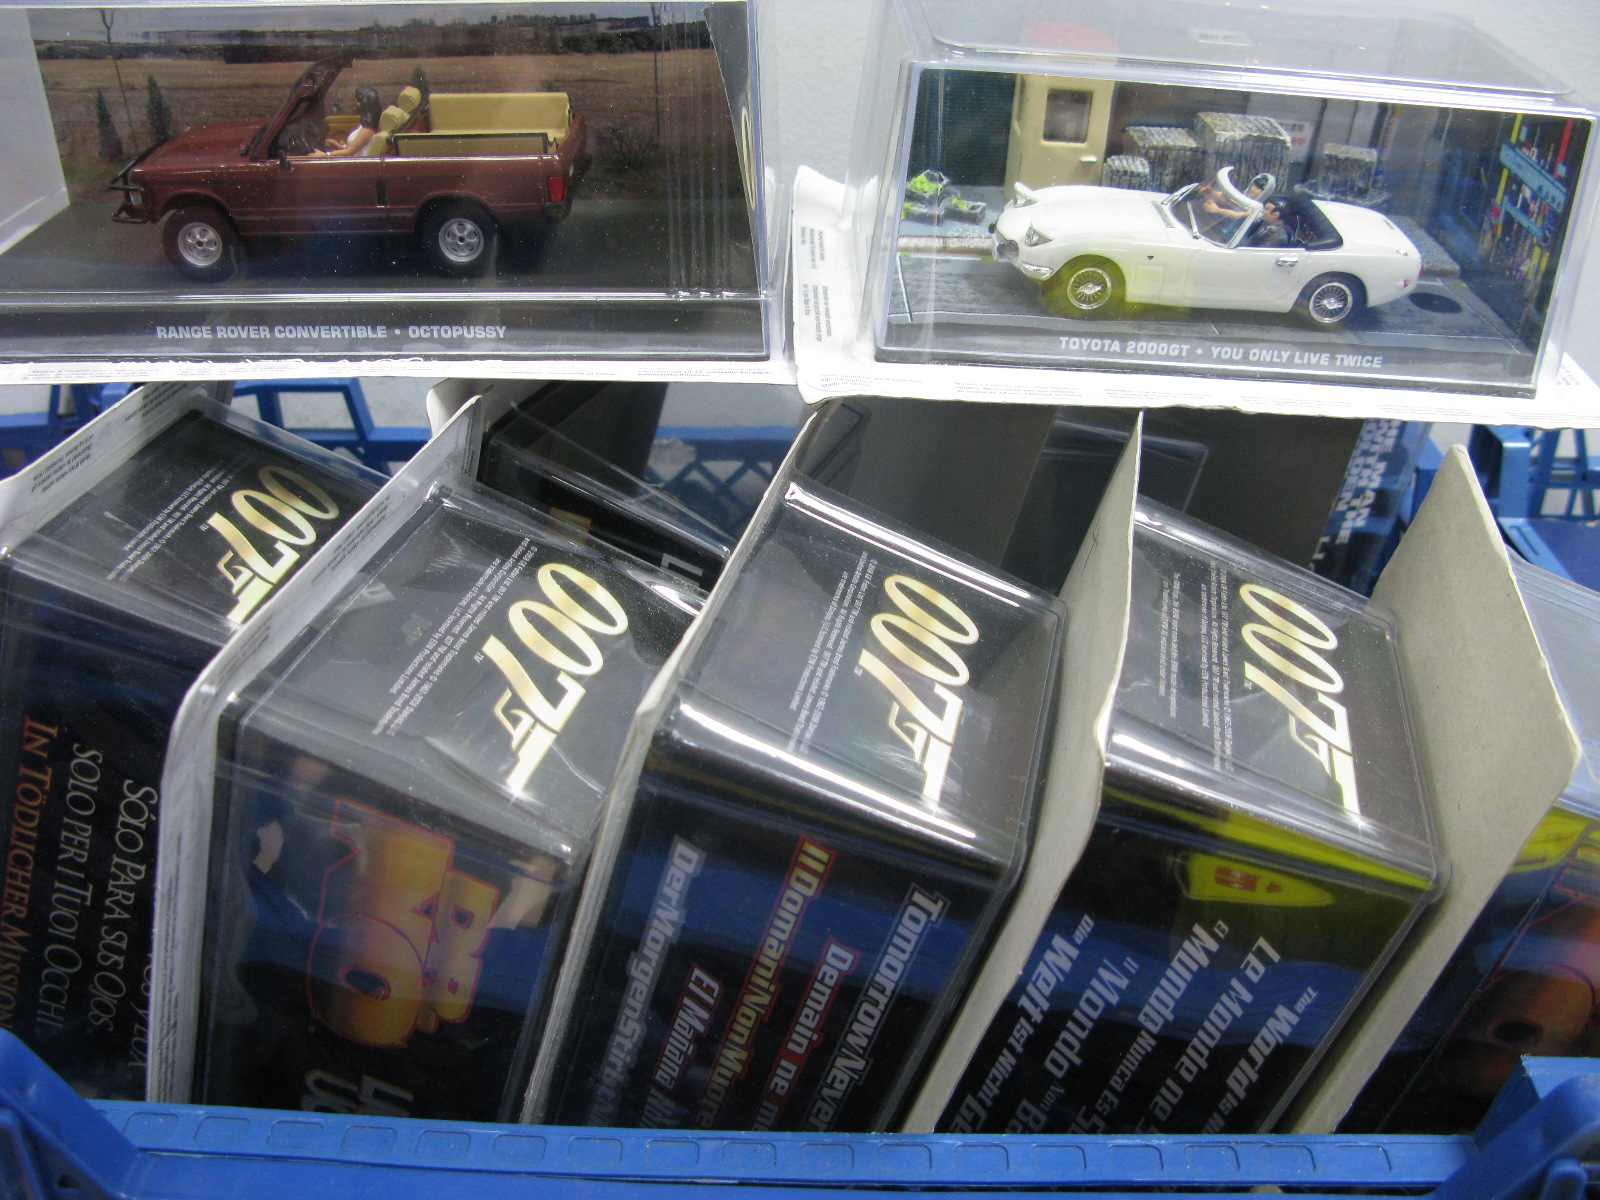 Ten Diecast Model Vehicles from The James Bond 007 'Pieceworks' Collection, including Ford